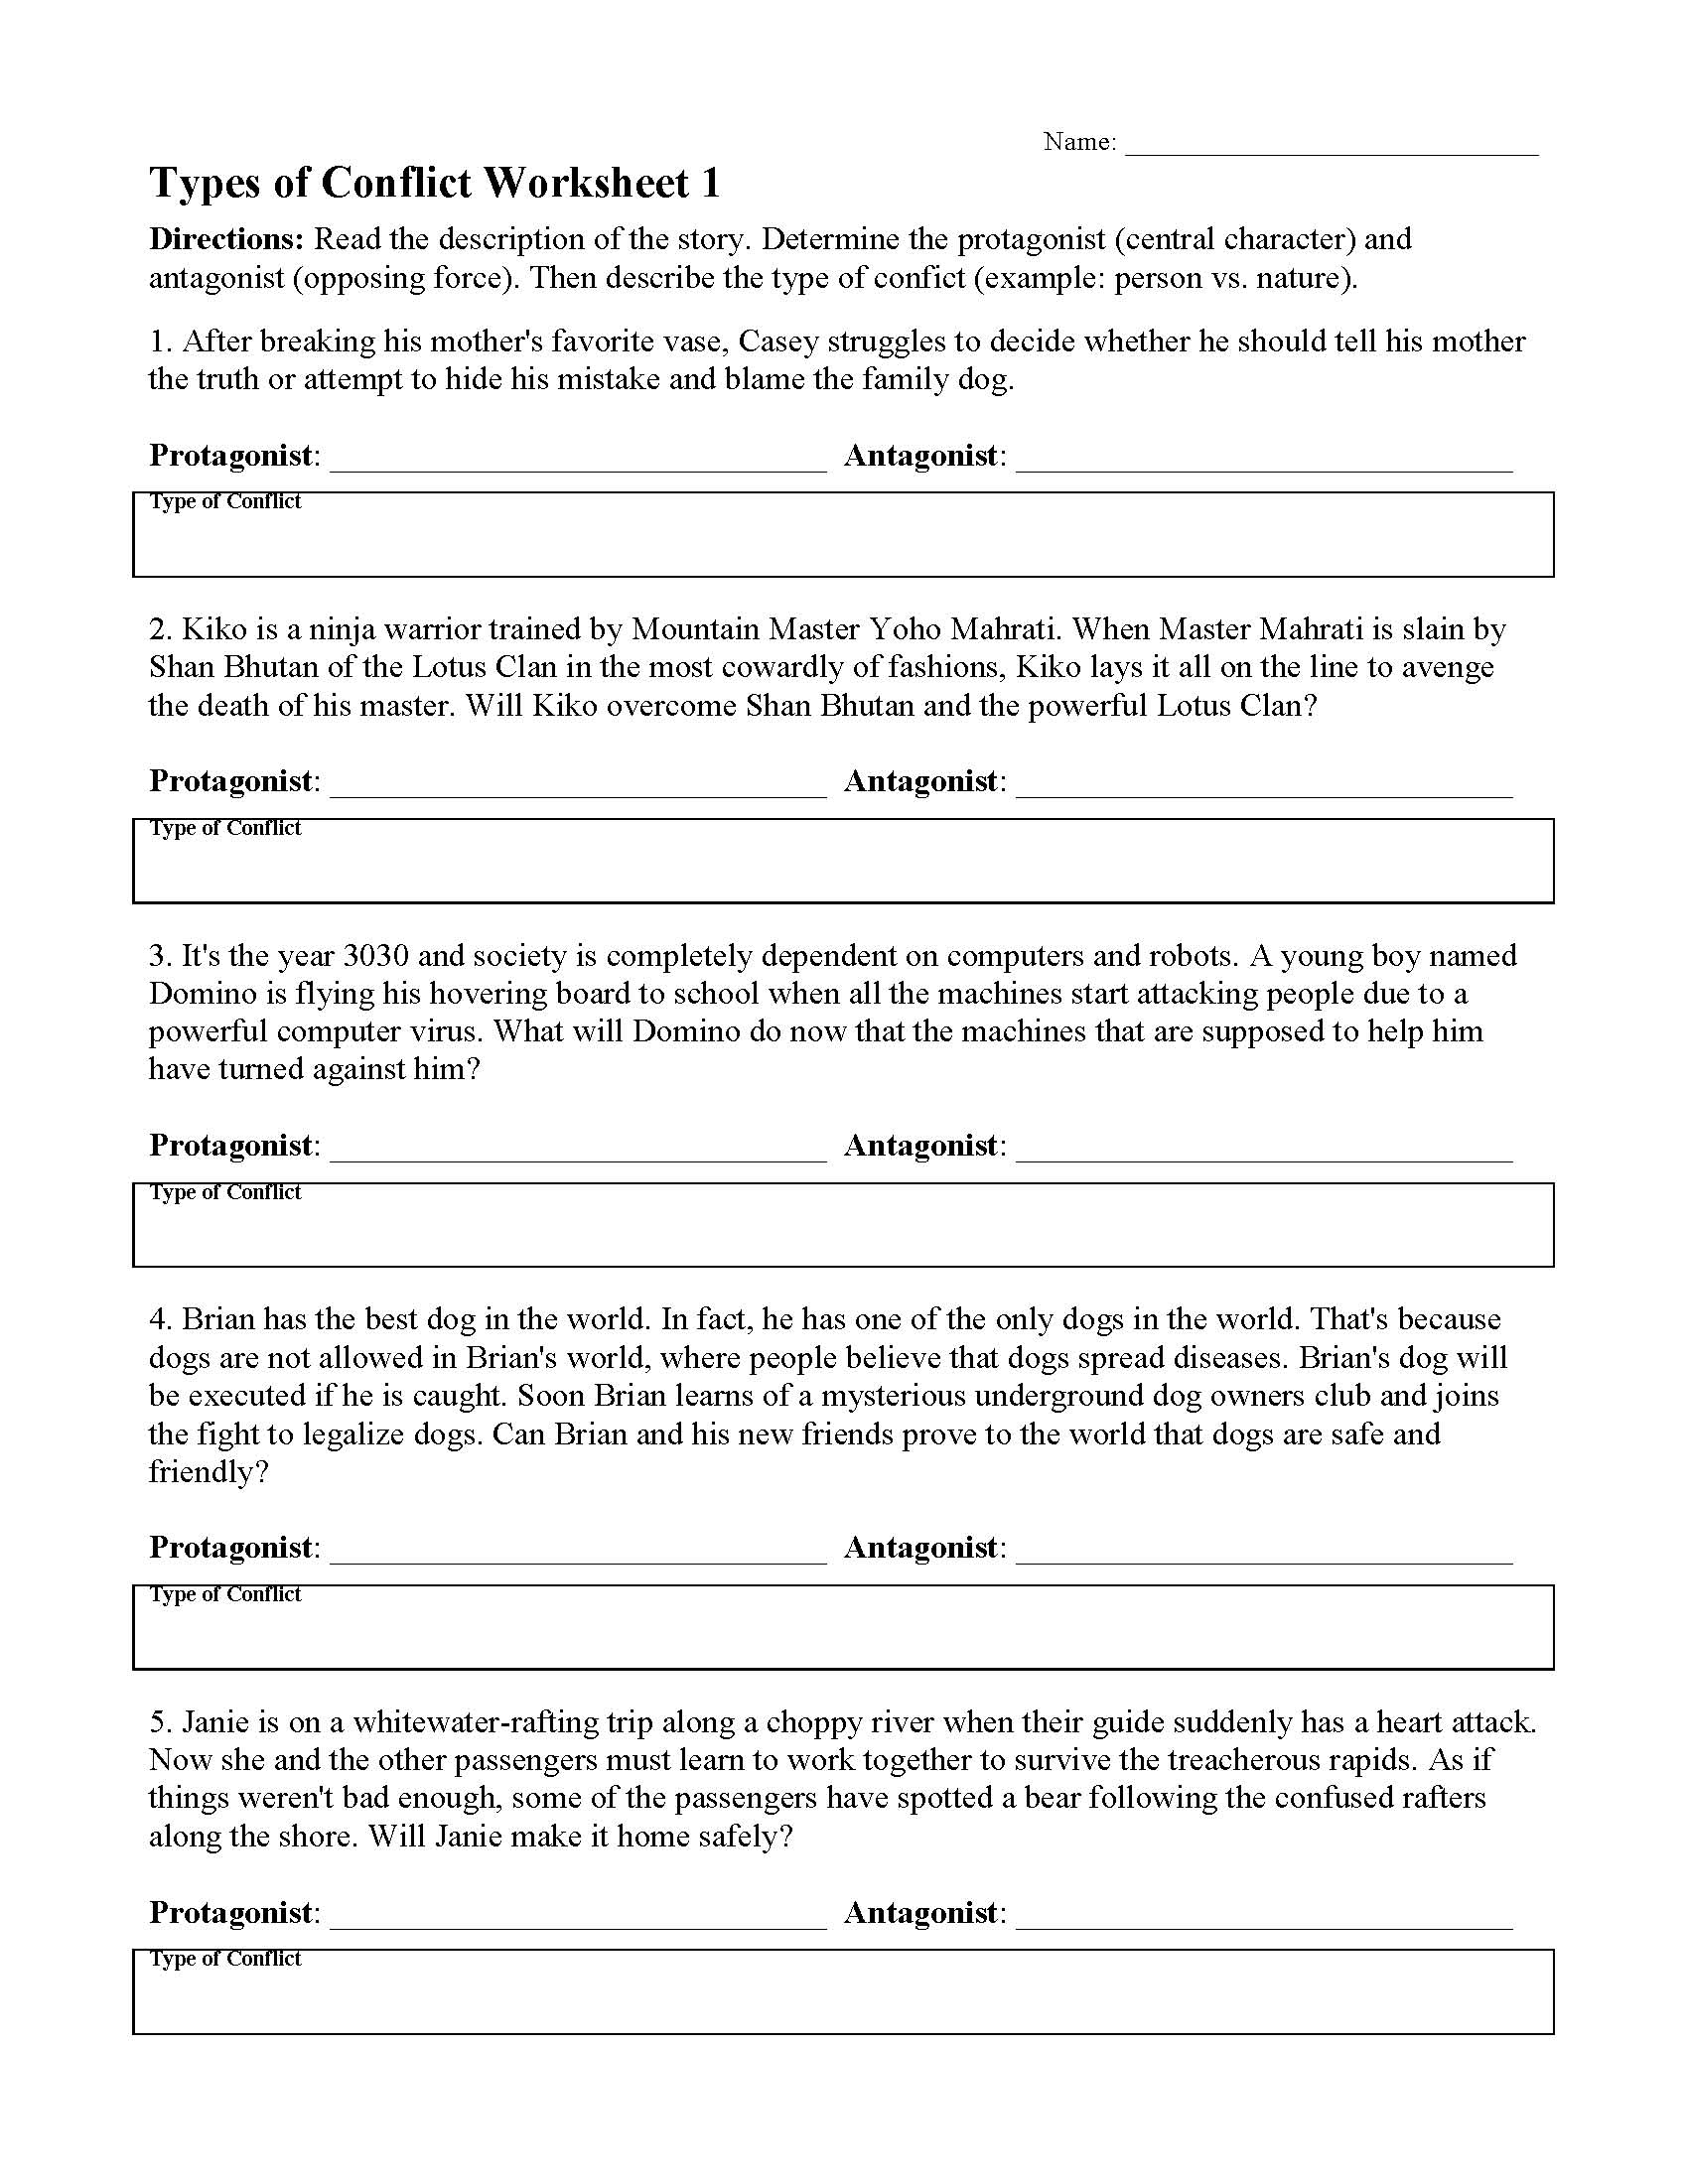 Character Types Worksheet